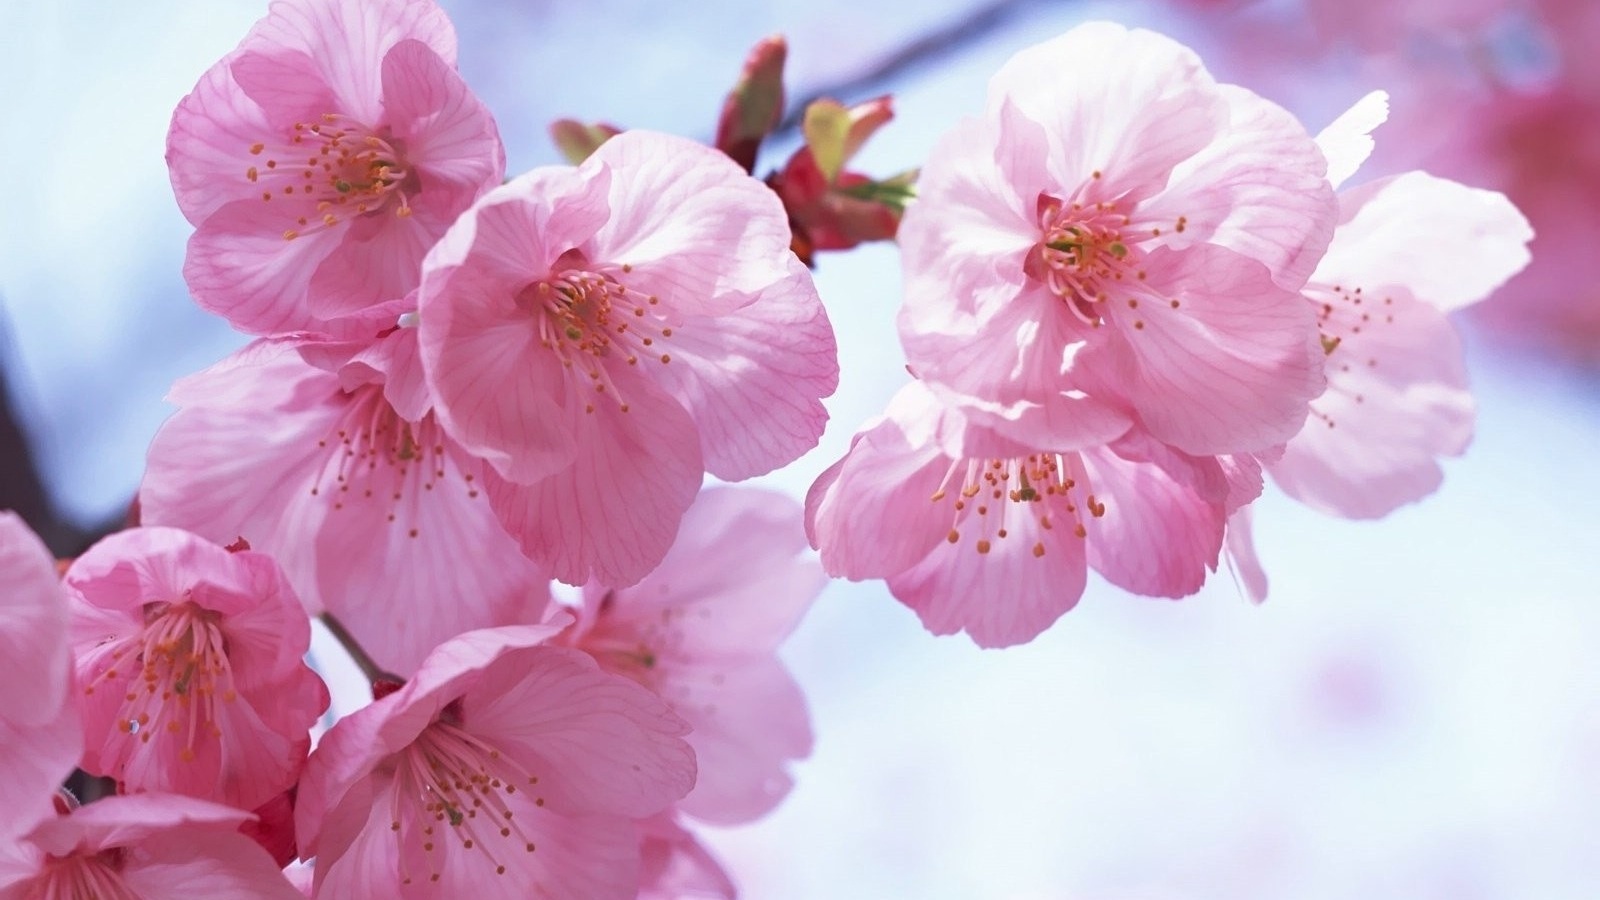 Pink Spring Flowers Wallpaper Gallery Yopriceville High